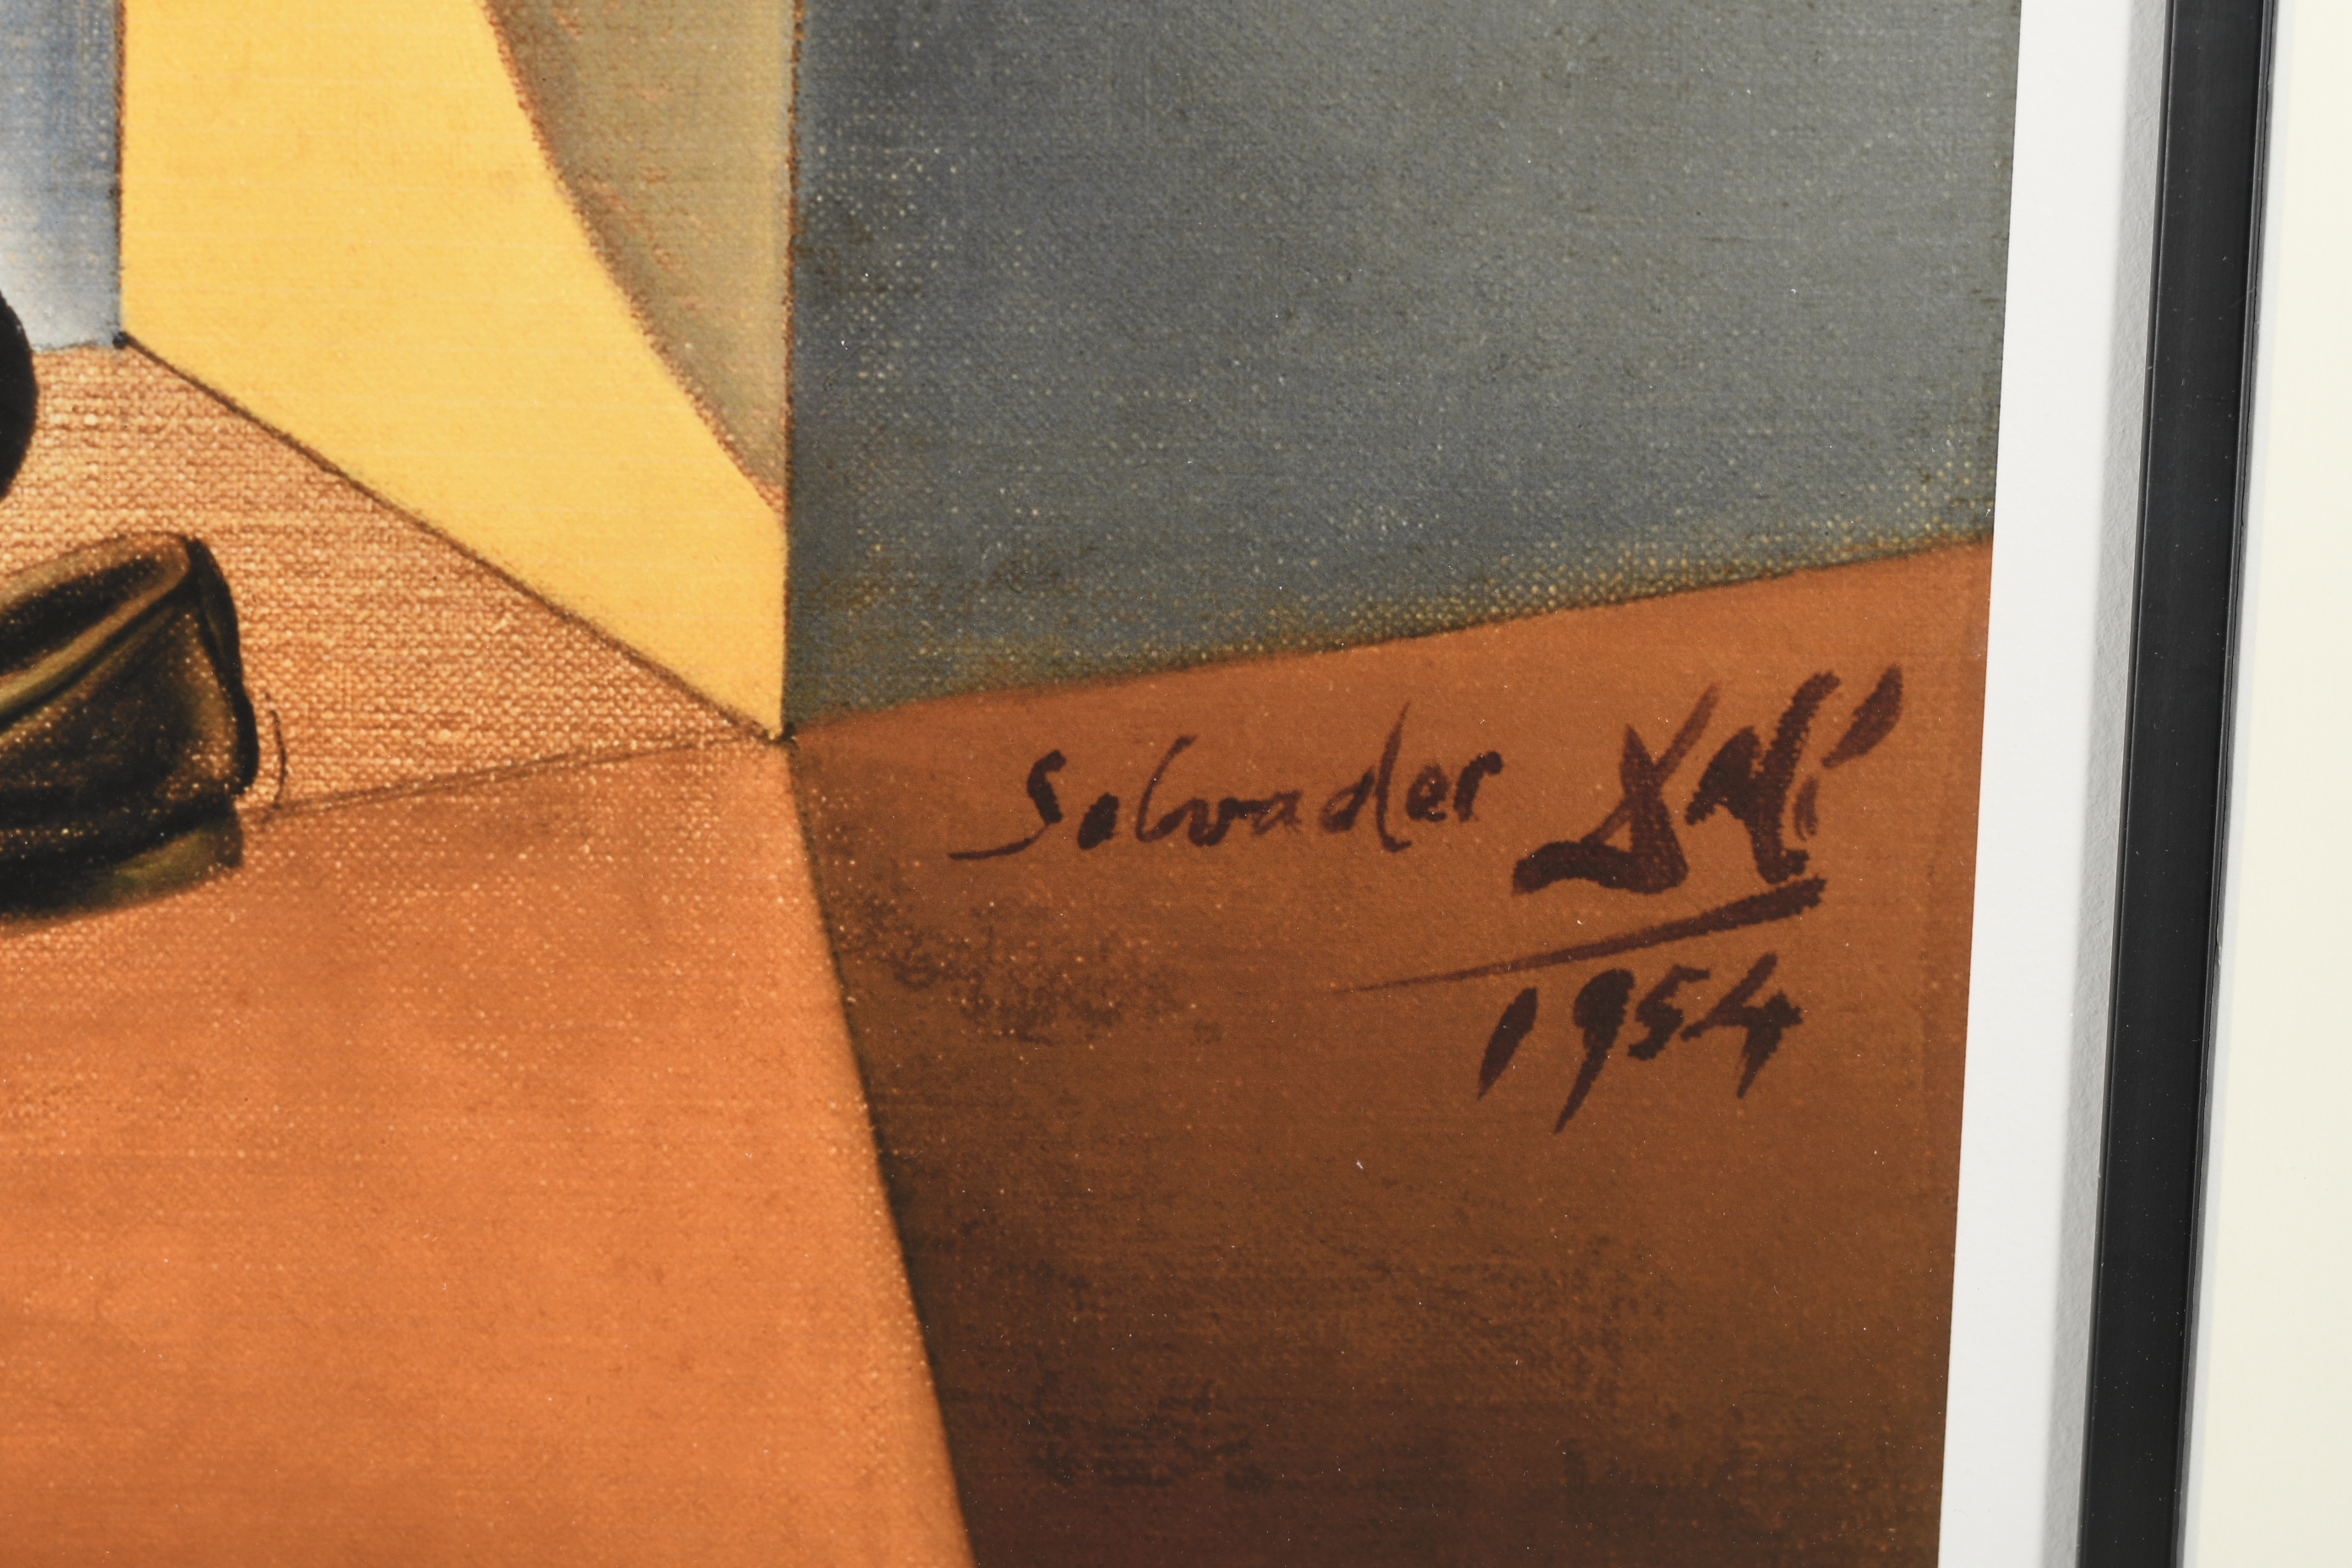 Salvador Dali Limited Edition. One of only 75 Published Worldwide. - Image 5 of 11